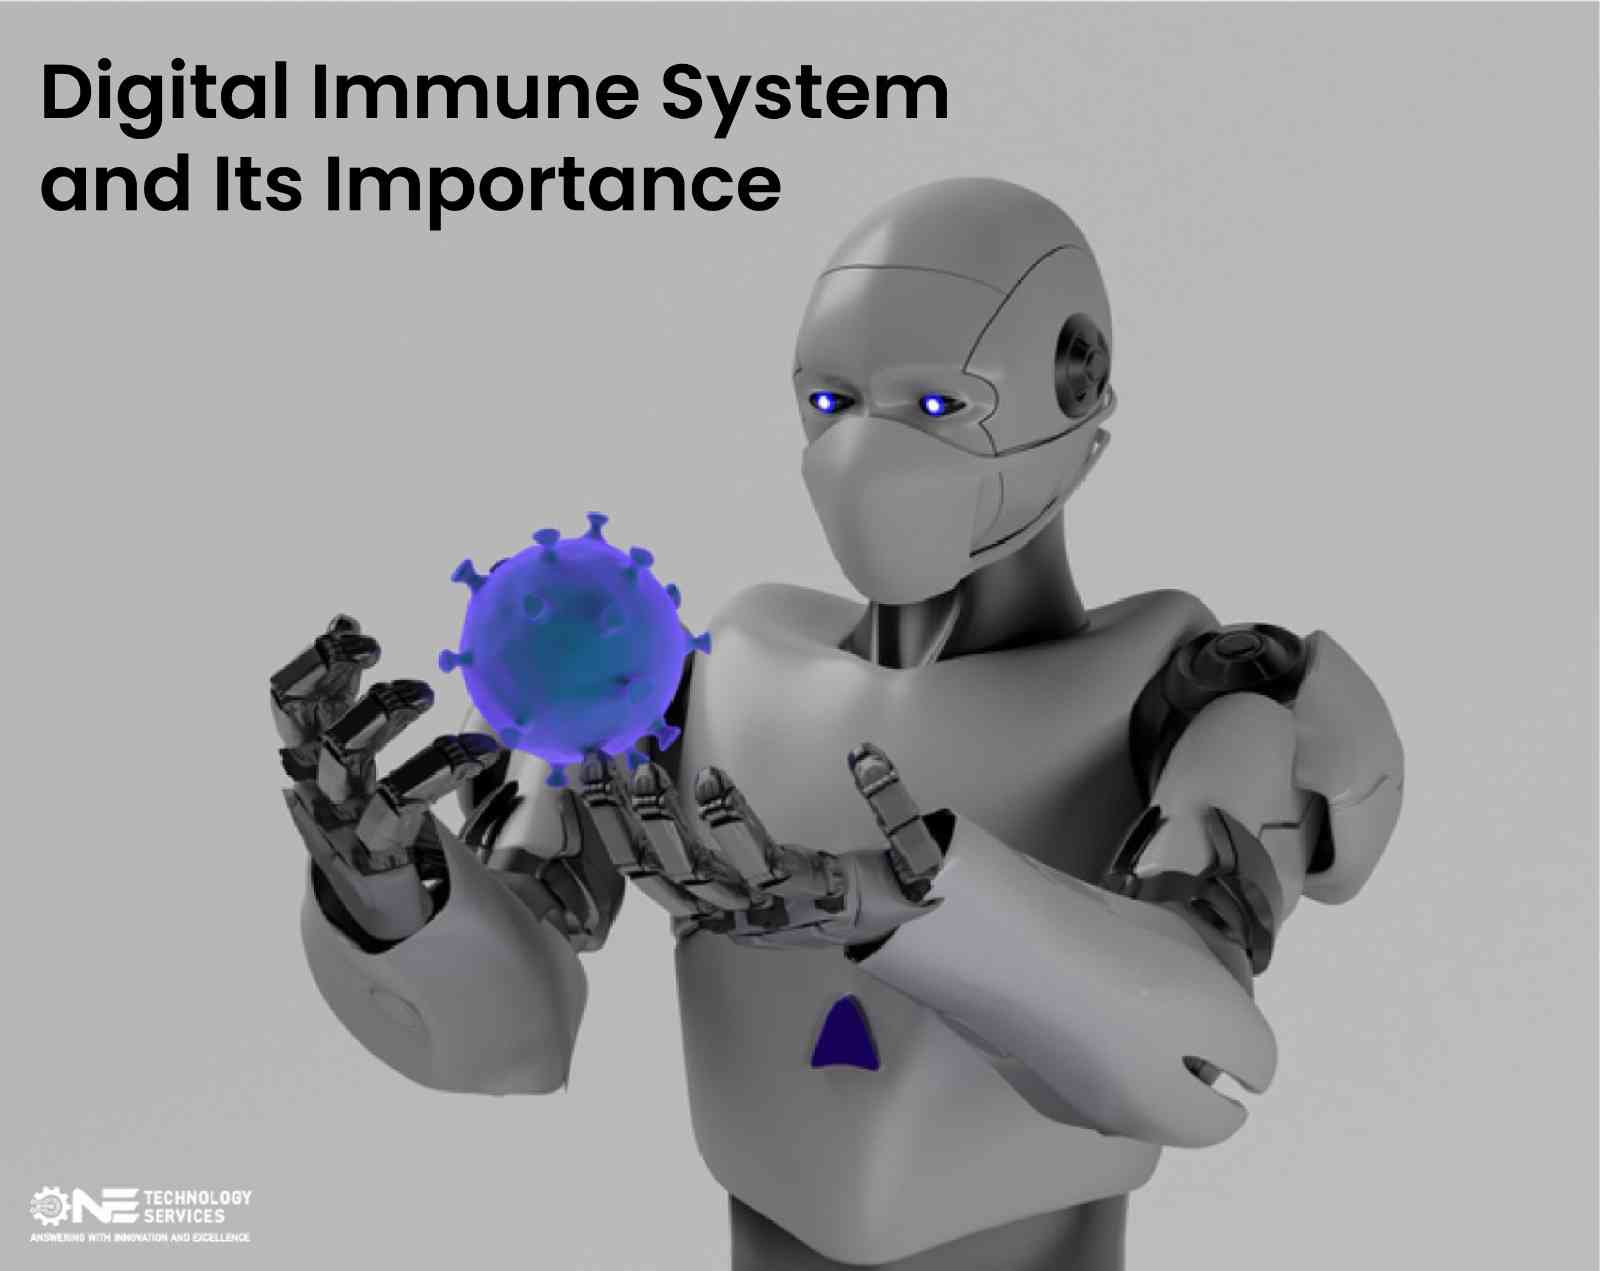 What is digital immune system?